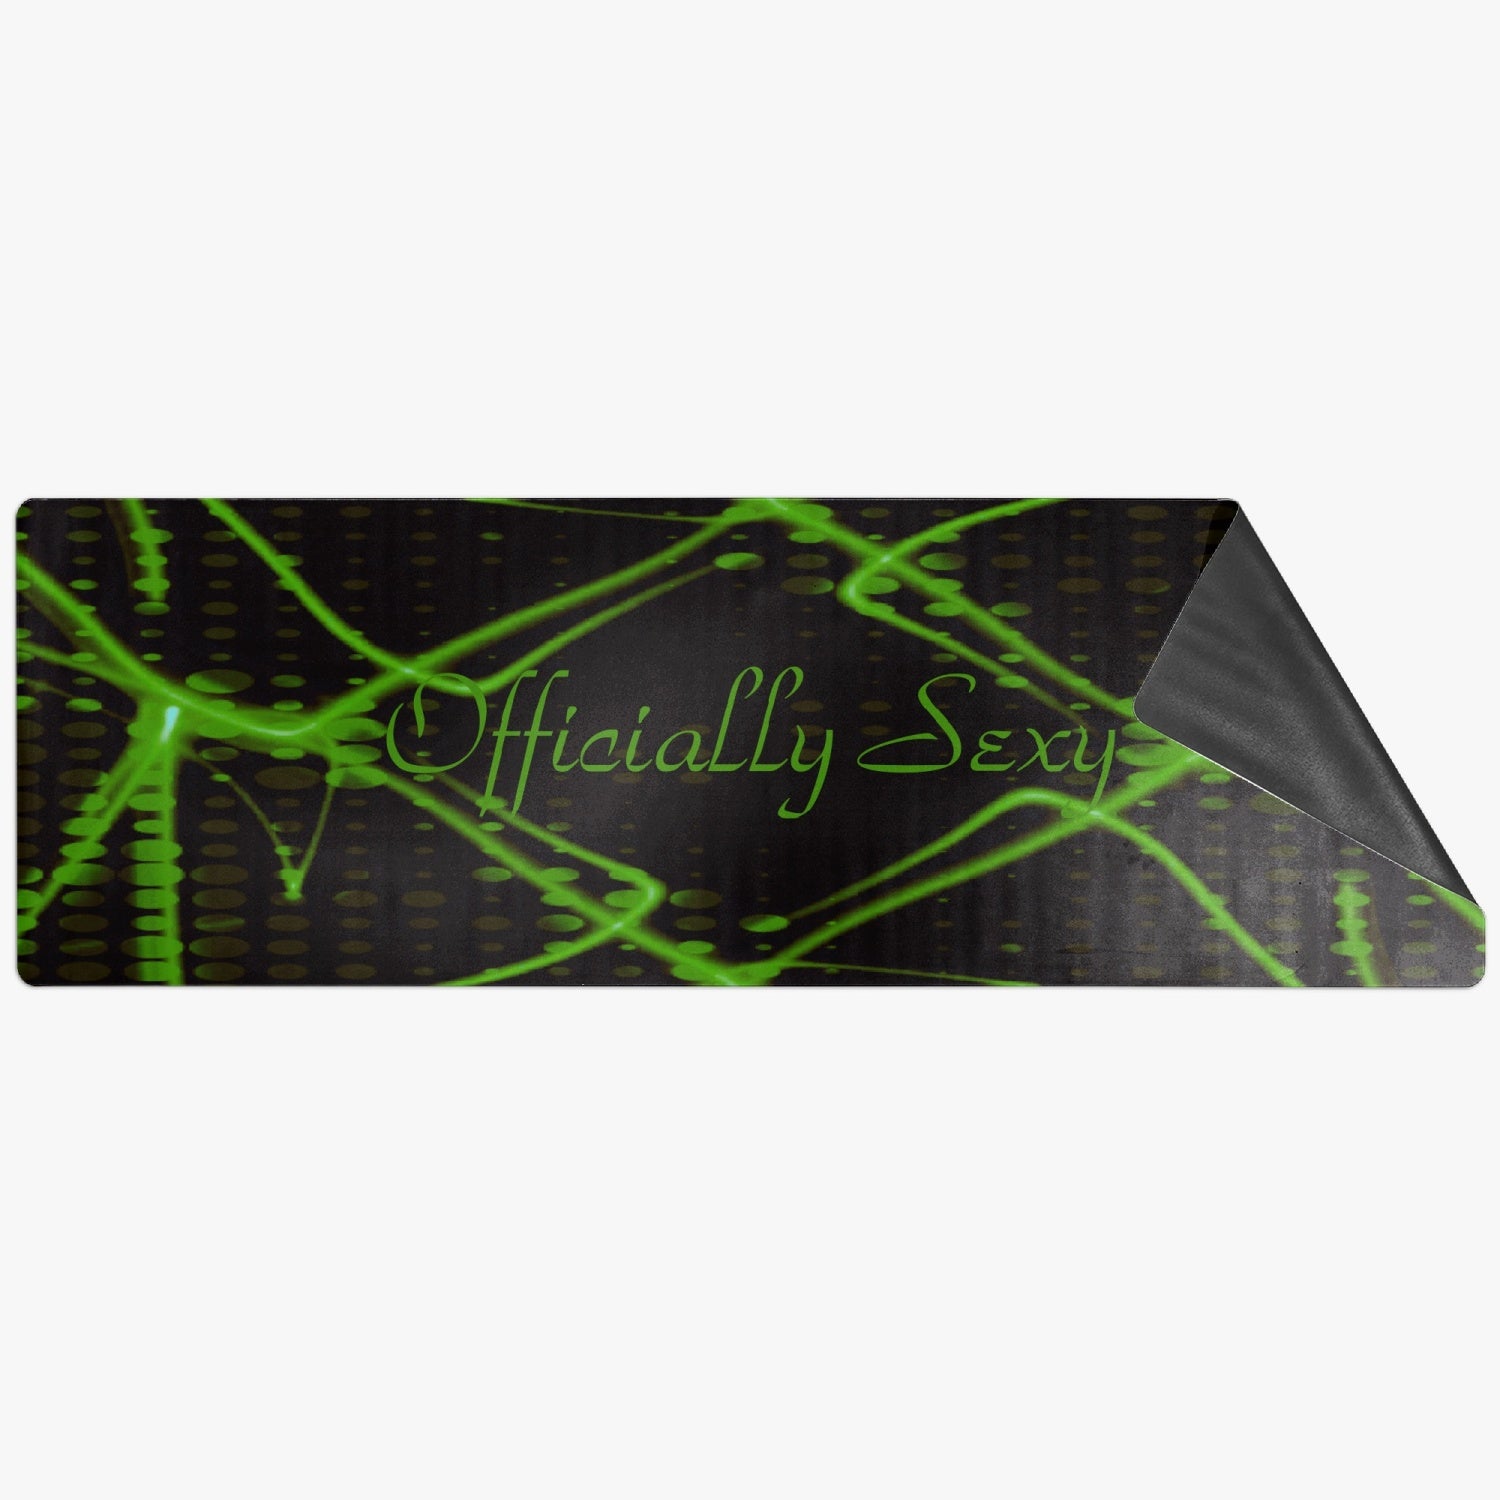 Officially Sexy Green & Black Laser Print Suede Anti-slip Yoga Mat